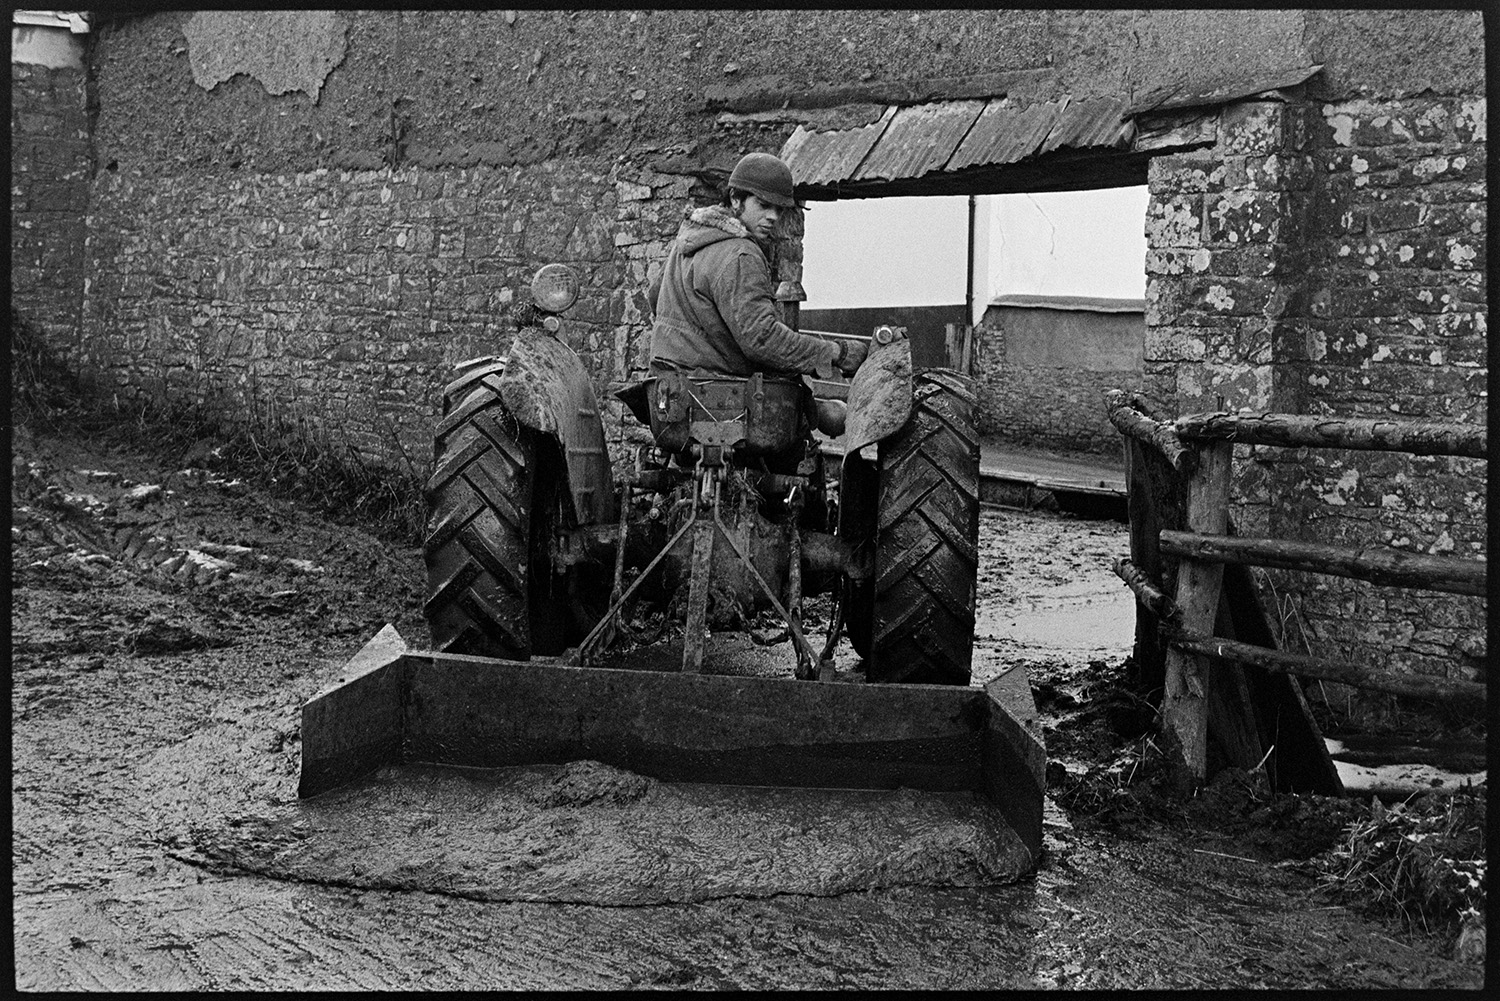 Clearing slurry with tractor and scraper.
[Graham Ward or David Ward on a tractor fitted with a scraper clearing slurry in the farmyard of Parsonage, Iddesleigh, by a stone and cob wall.]